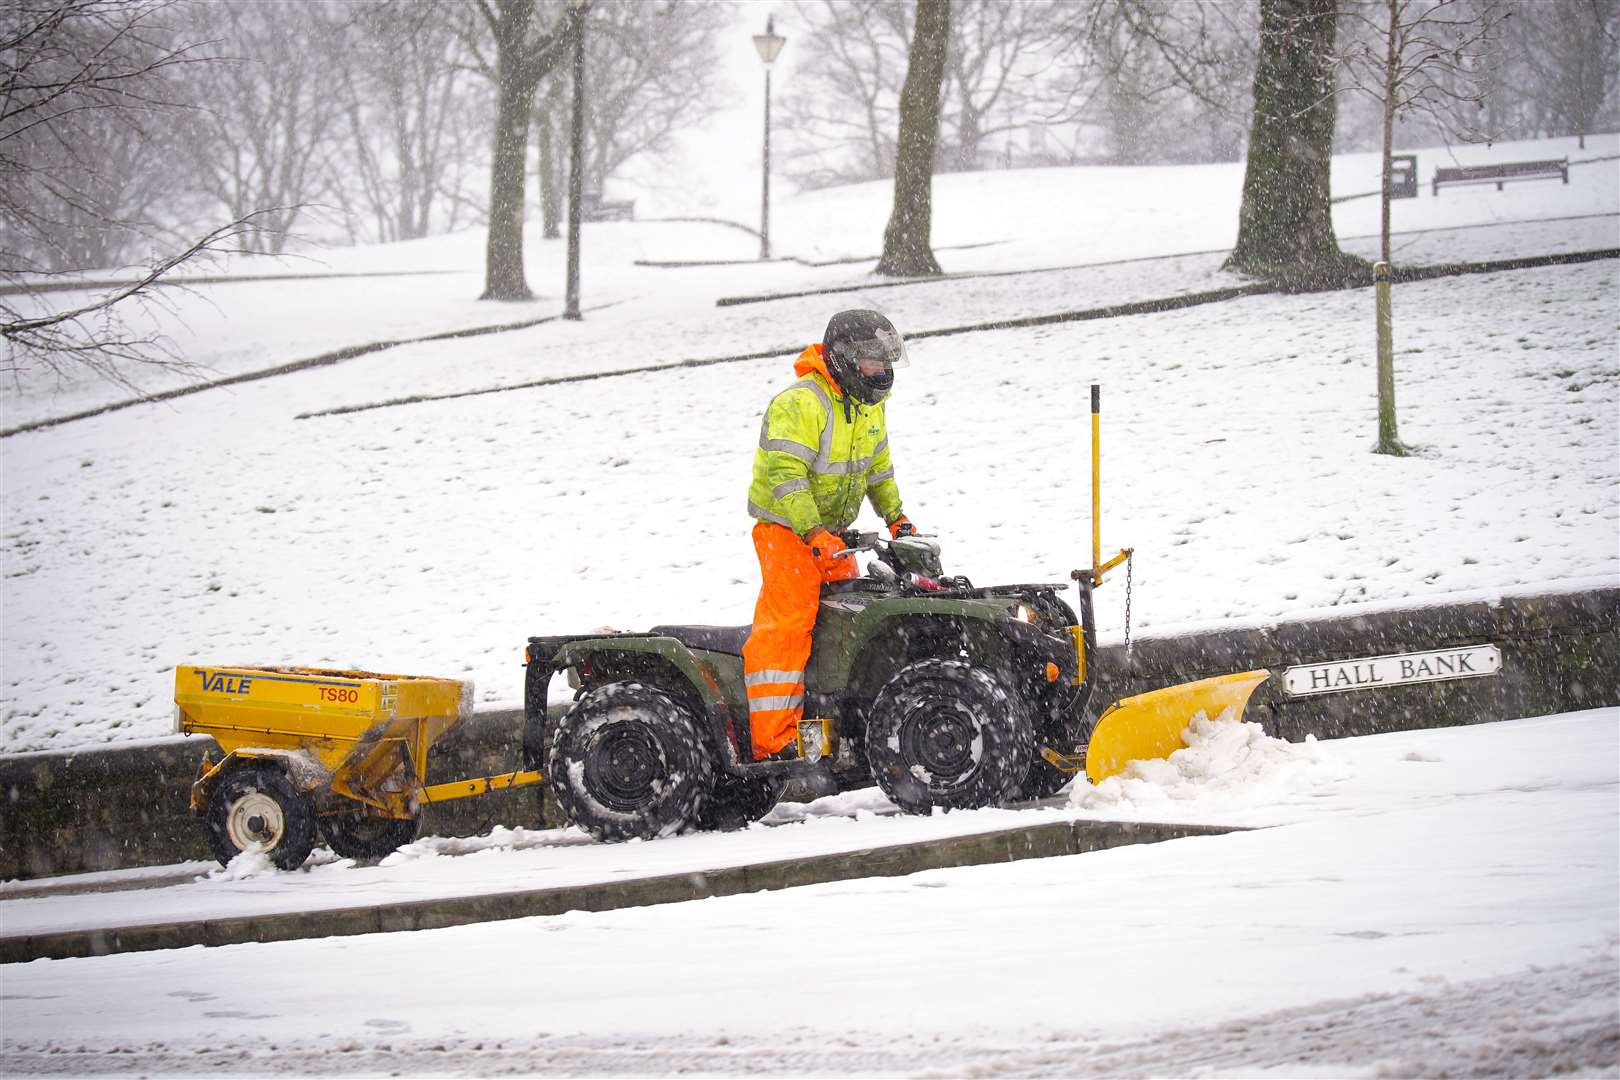 A snowplough clears a path at Hall Bank in Buxton in the Peak District (Peter Byrne/PA)